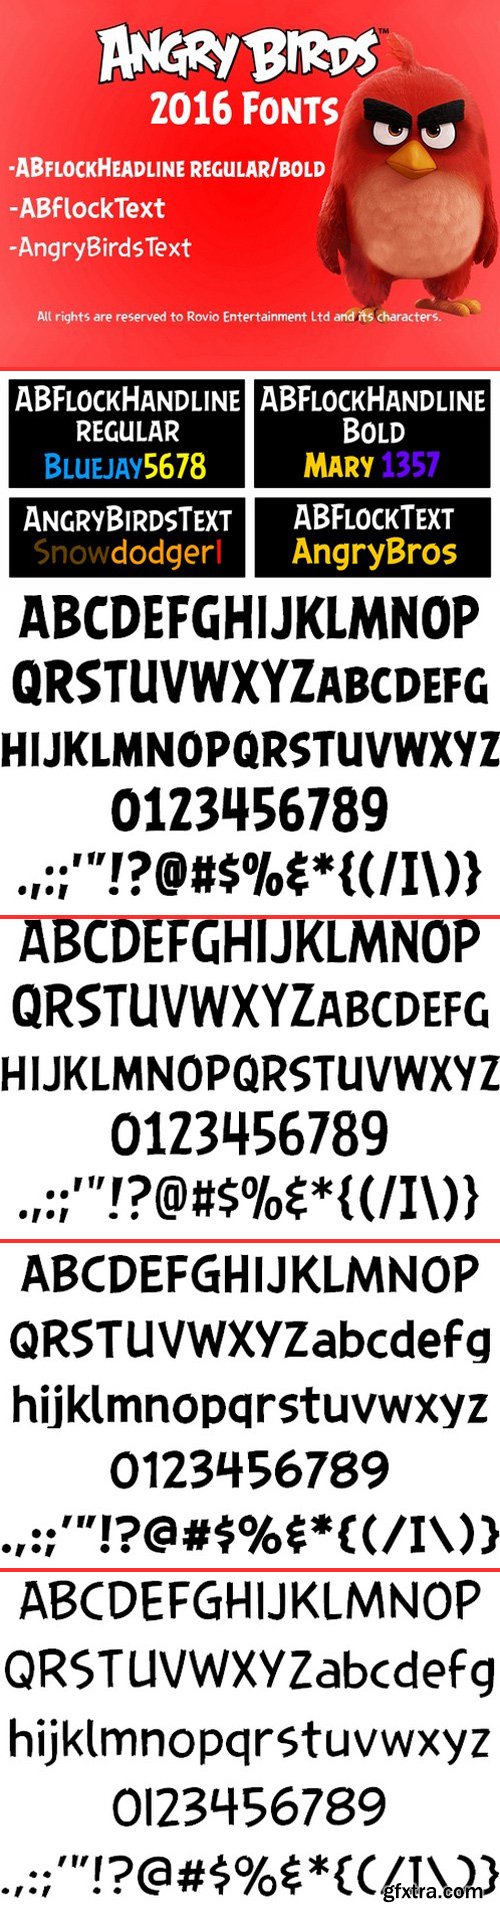 ABFlockText Font Family angry birds